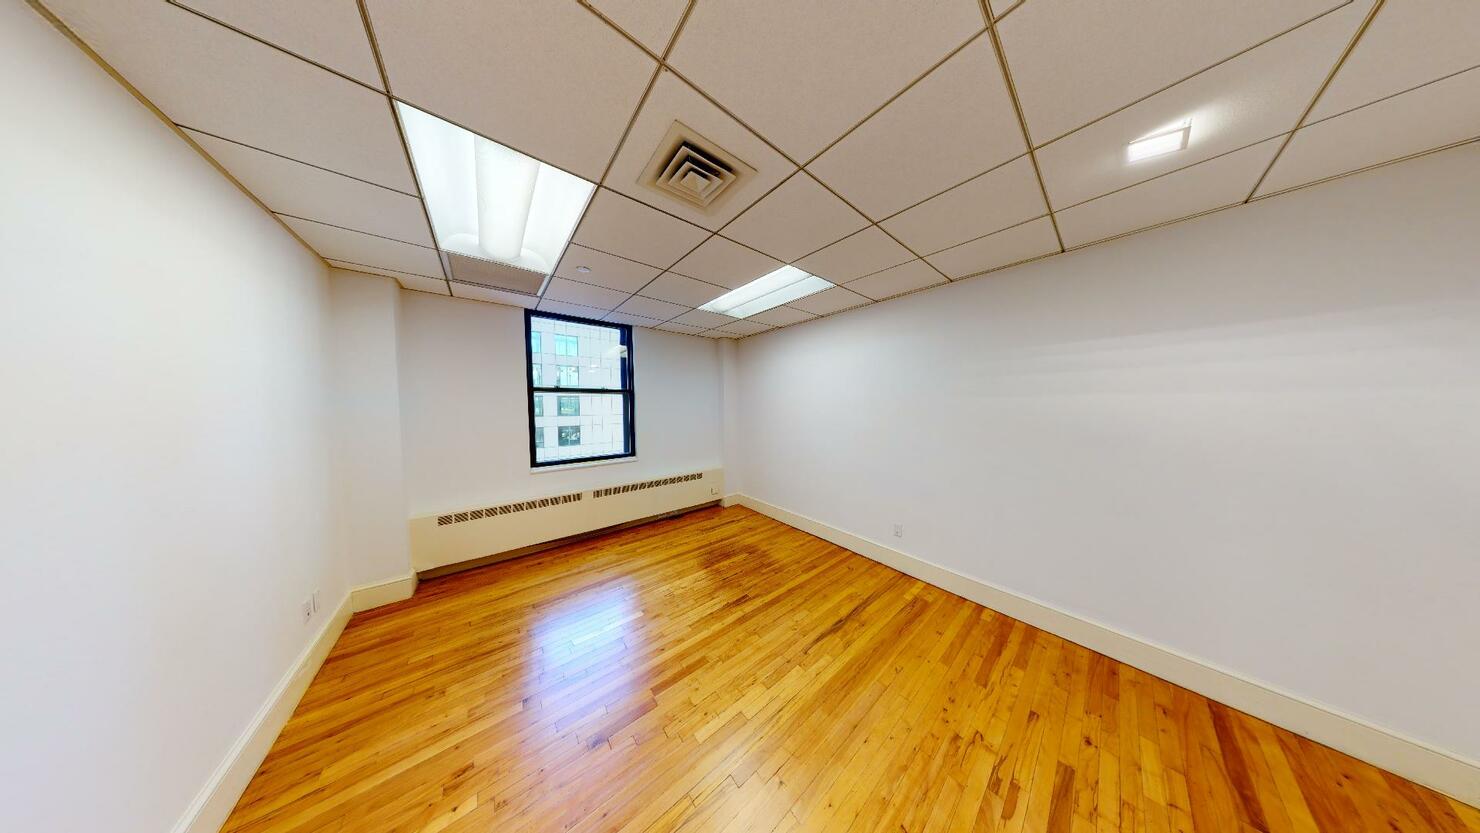 483 Tenth Avenue Office Space - Office Room with Hardwood Floor